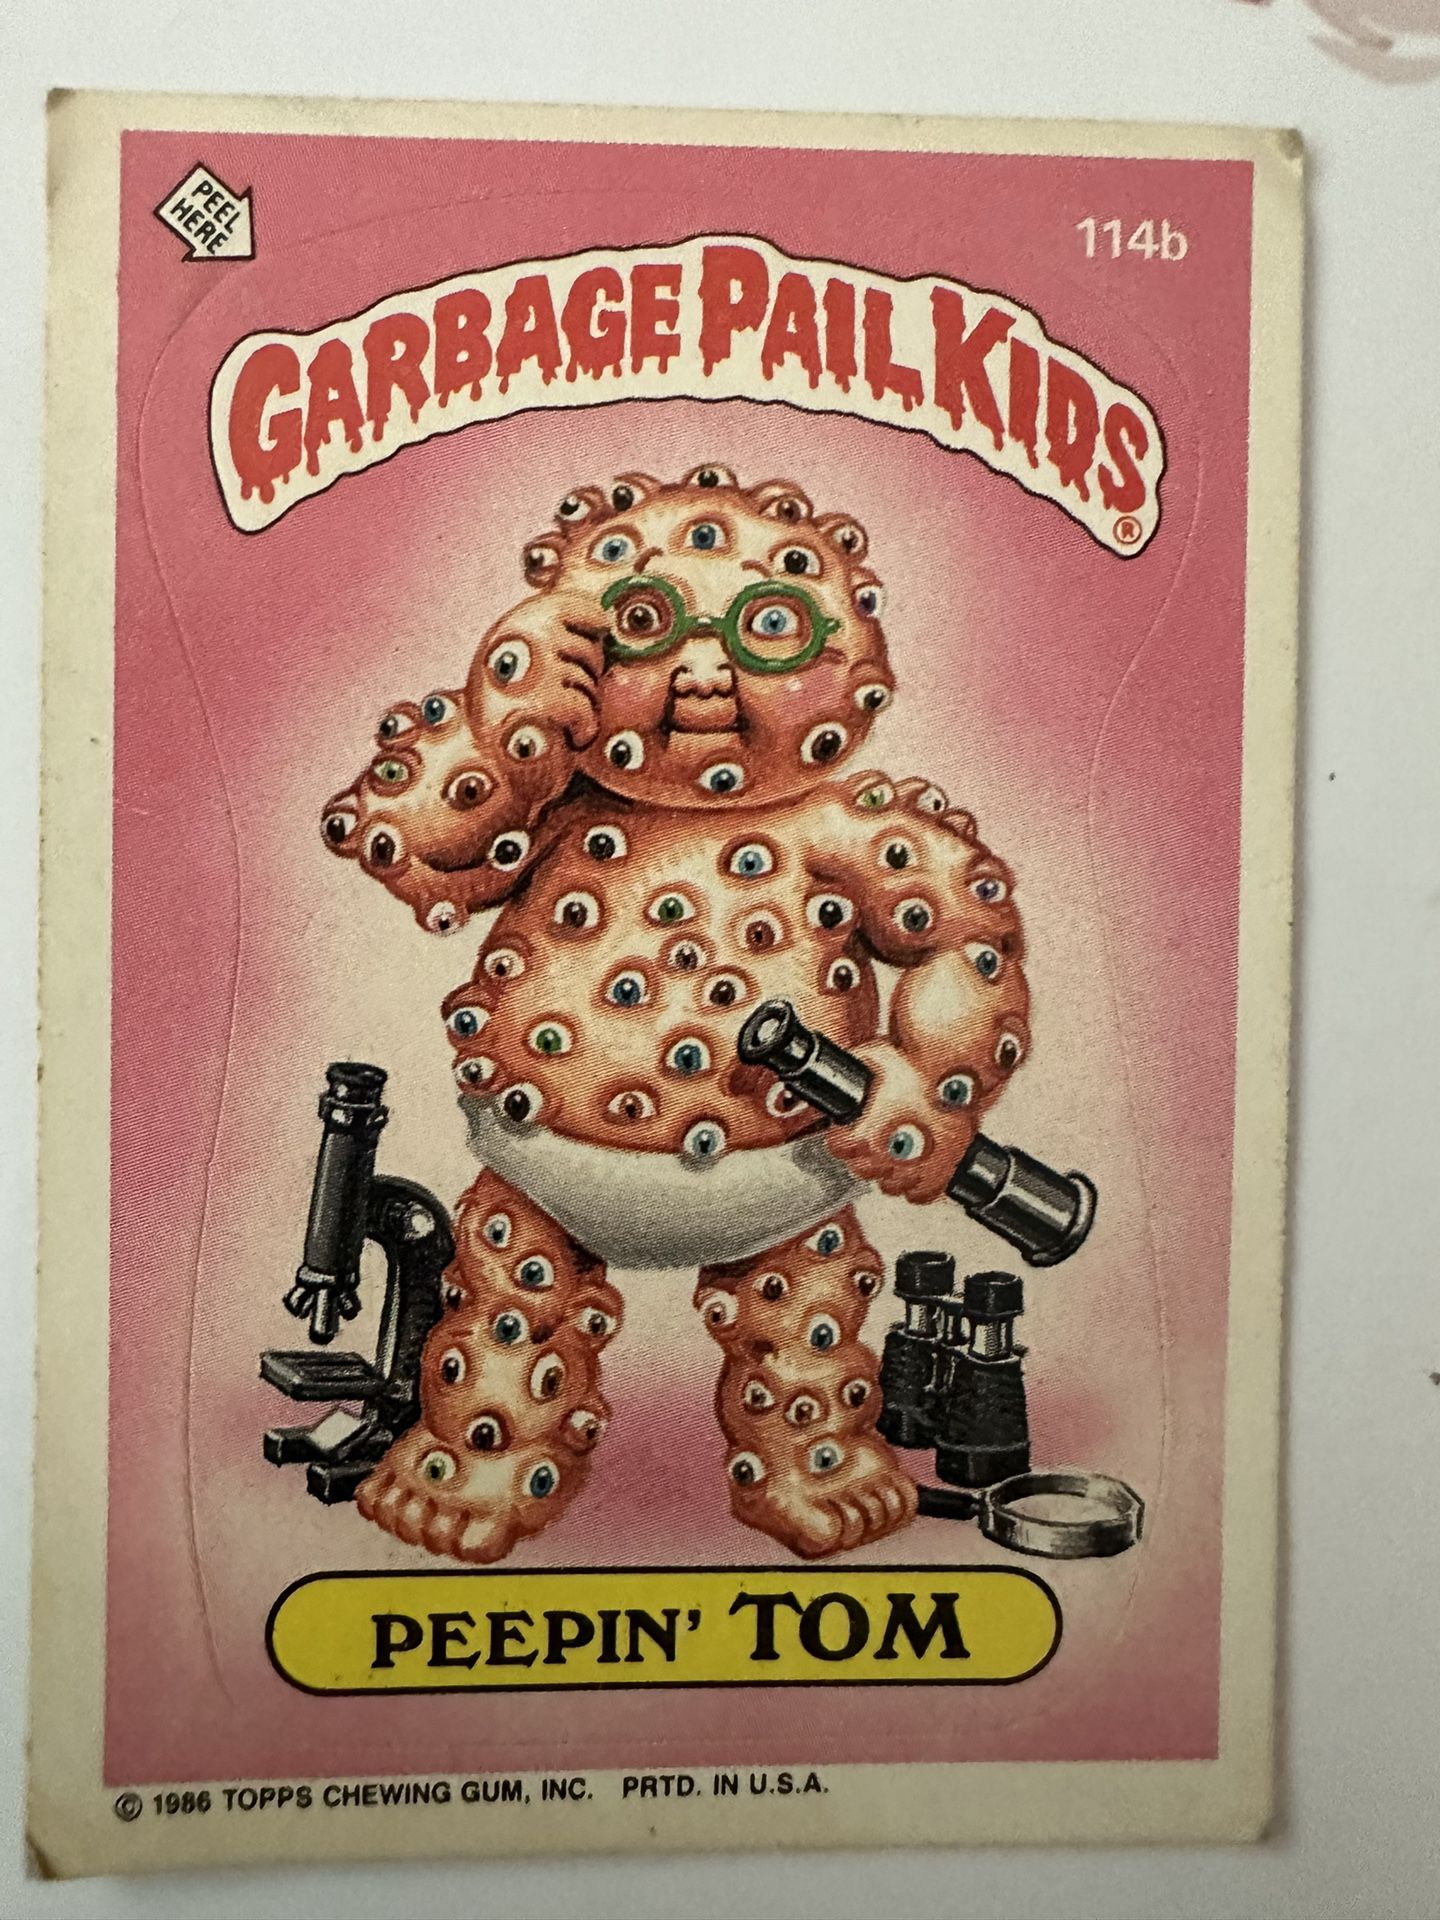 Original Authentic 1985 Garbage Pail Kids Preowned Card